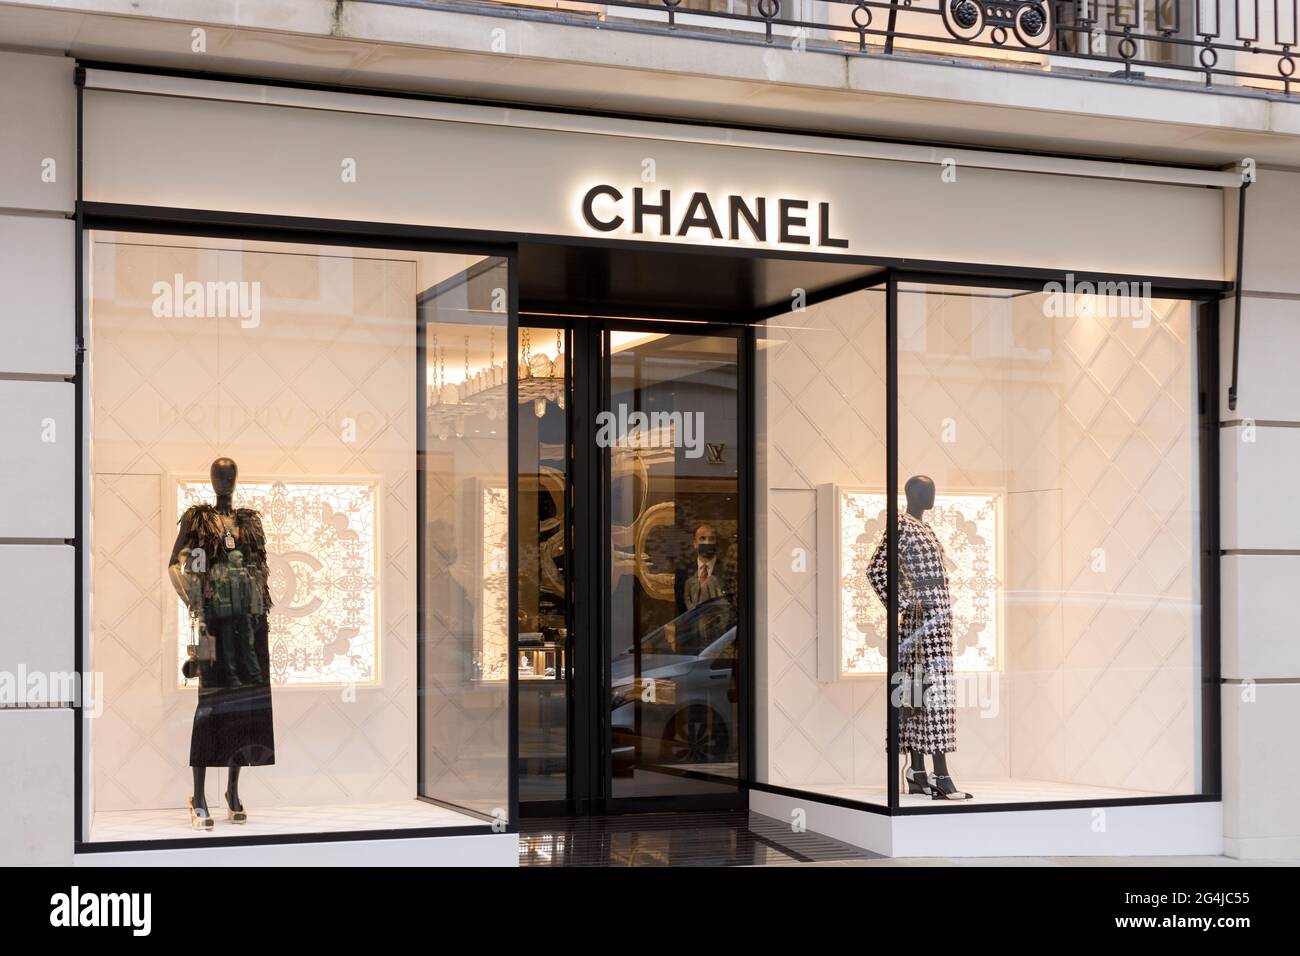 Chanel logo is seen at one of their stores on New Bond Street in London. Stock Photo